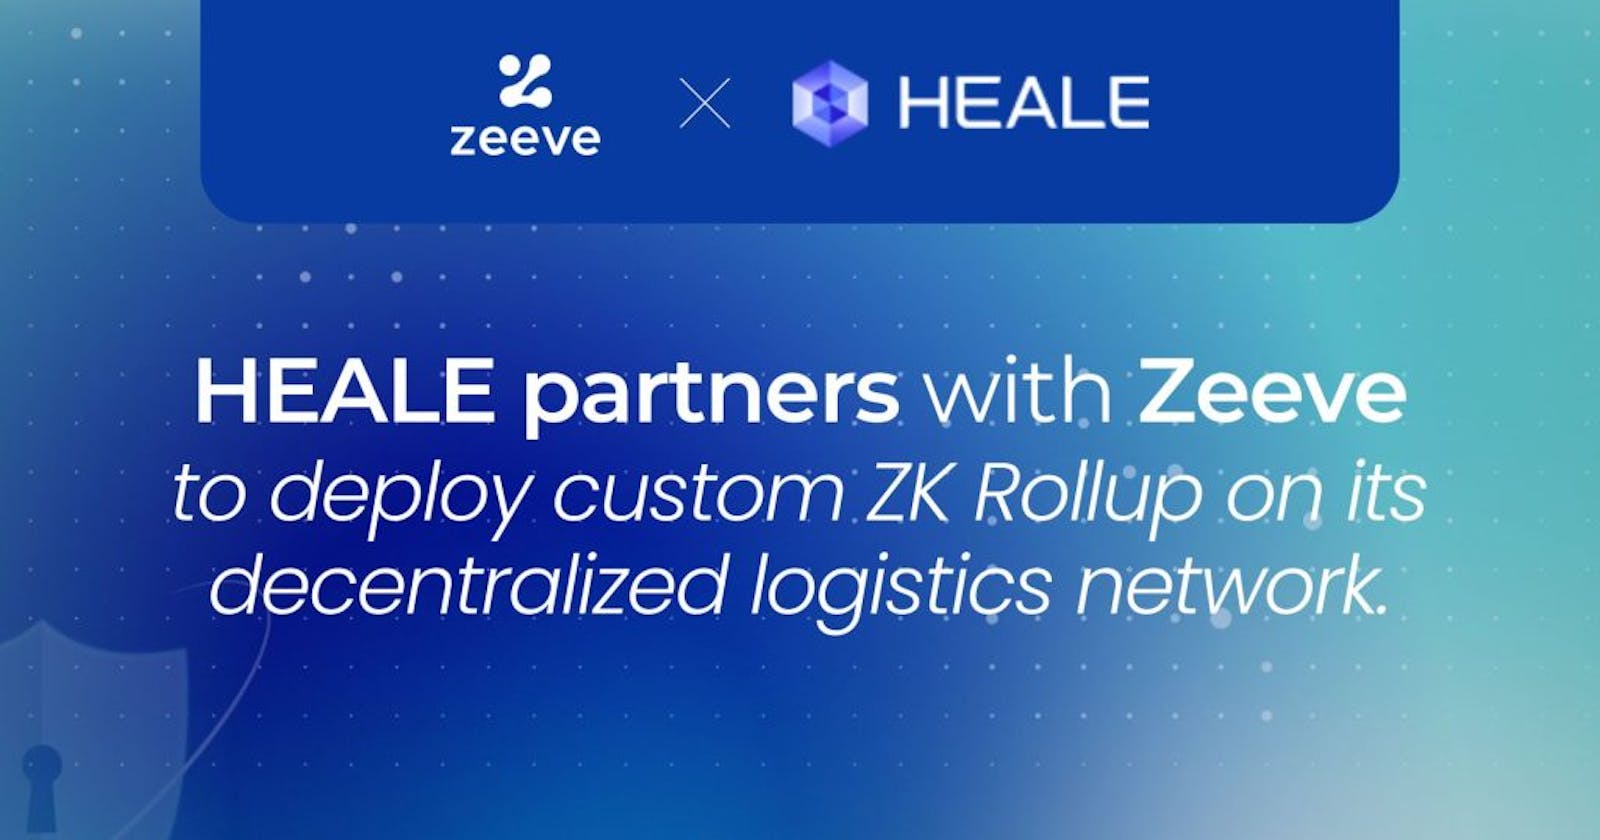 HEALE partners with Zeeve to deploy custom ZK Rollup on its decentralized logistics network